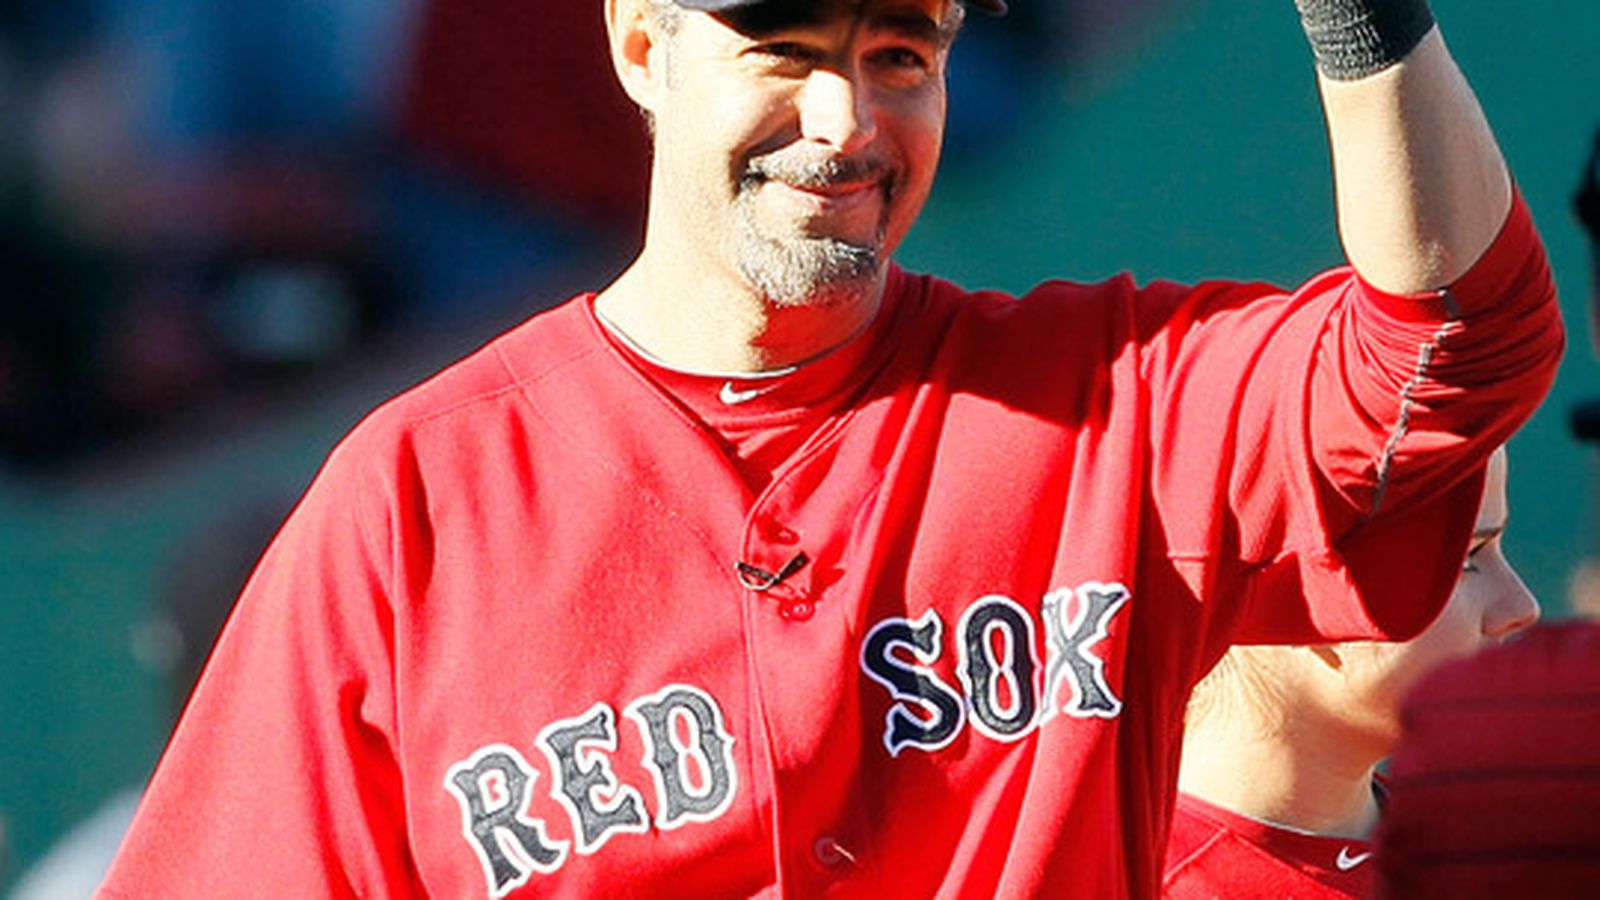 mike lowell red sox jersey